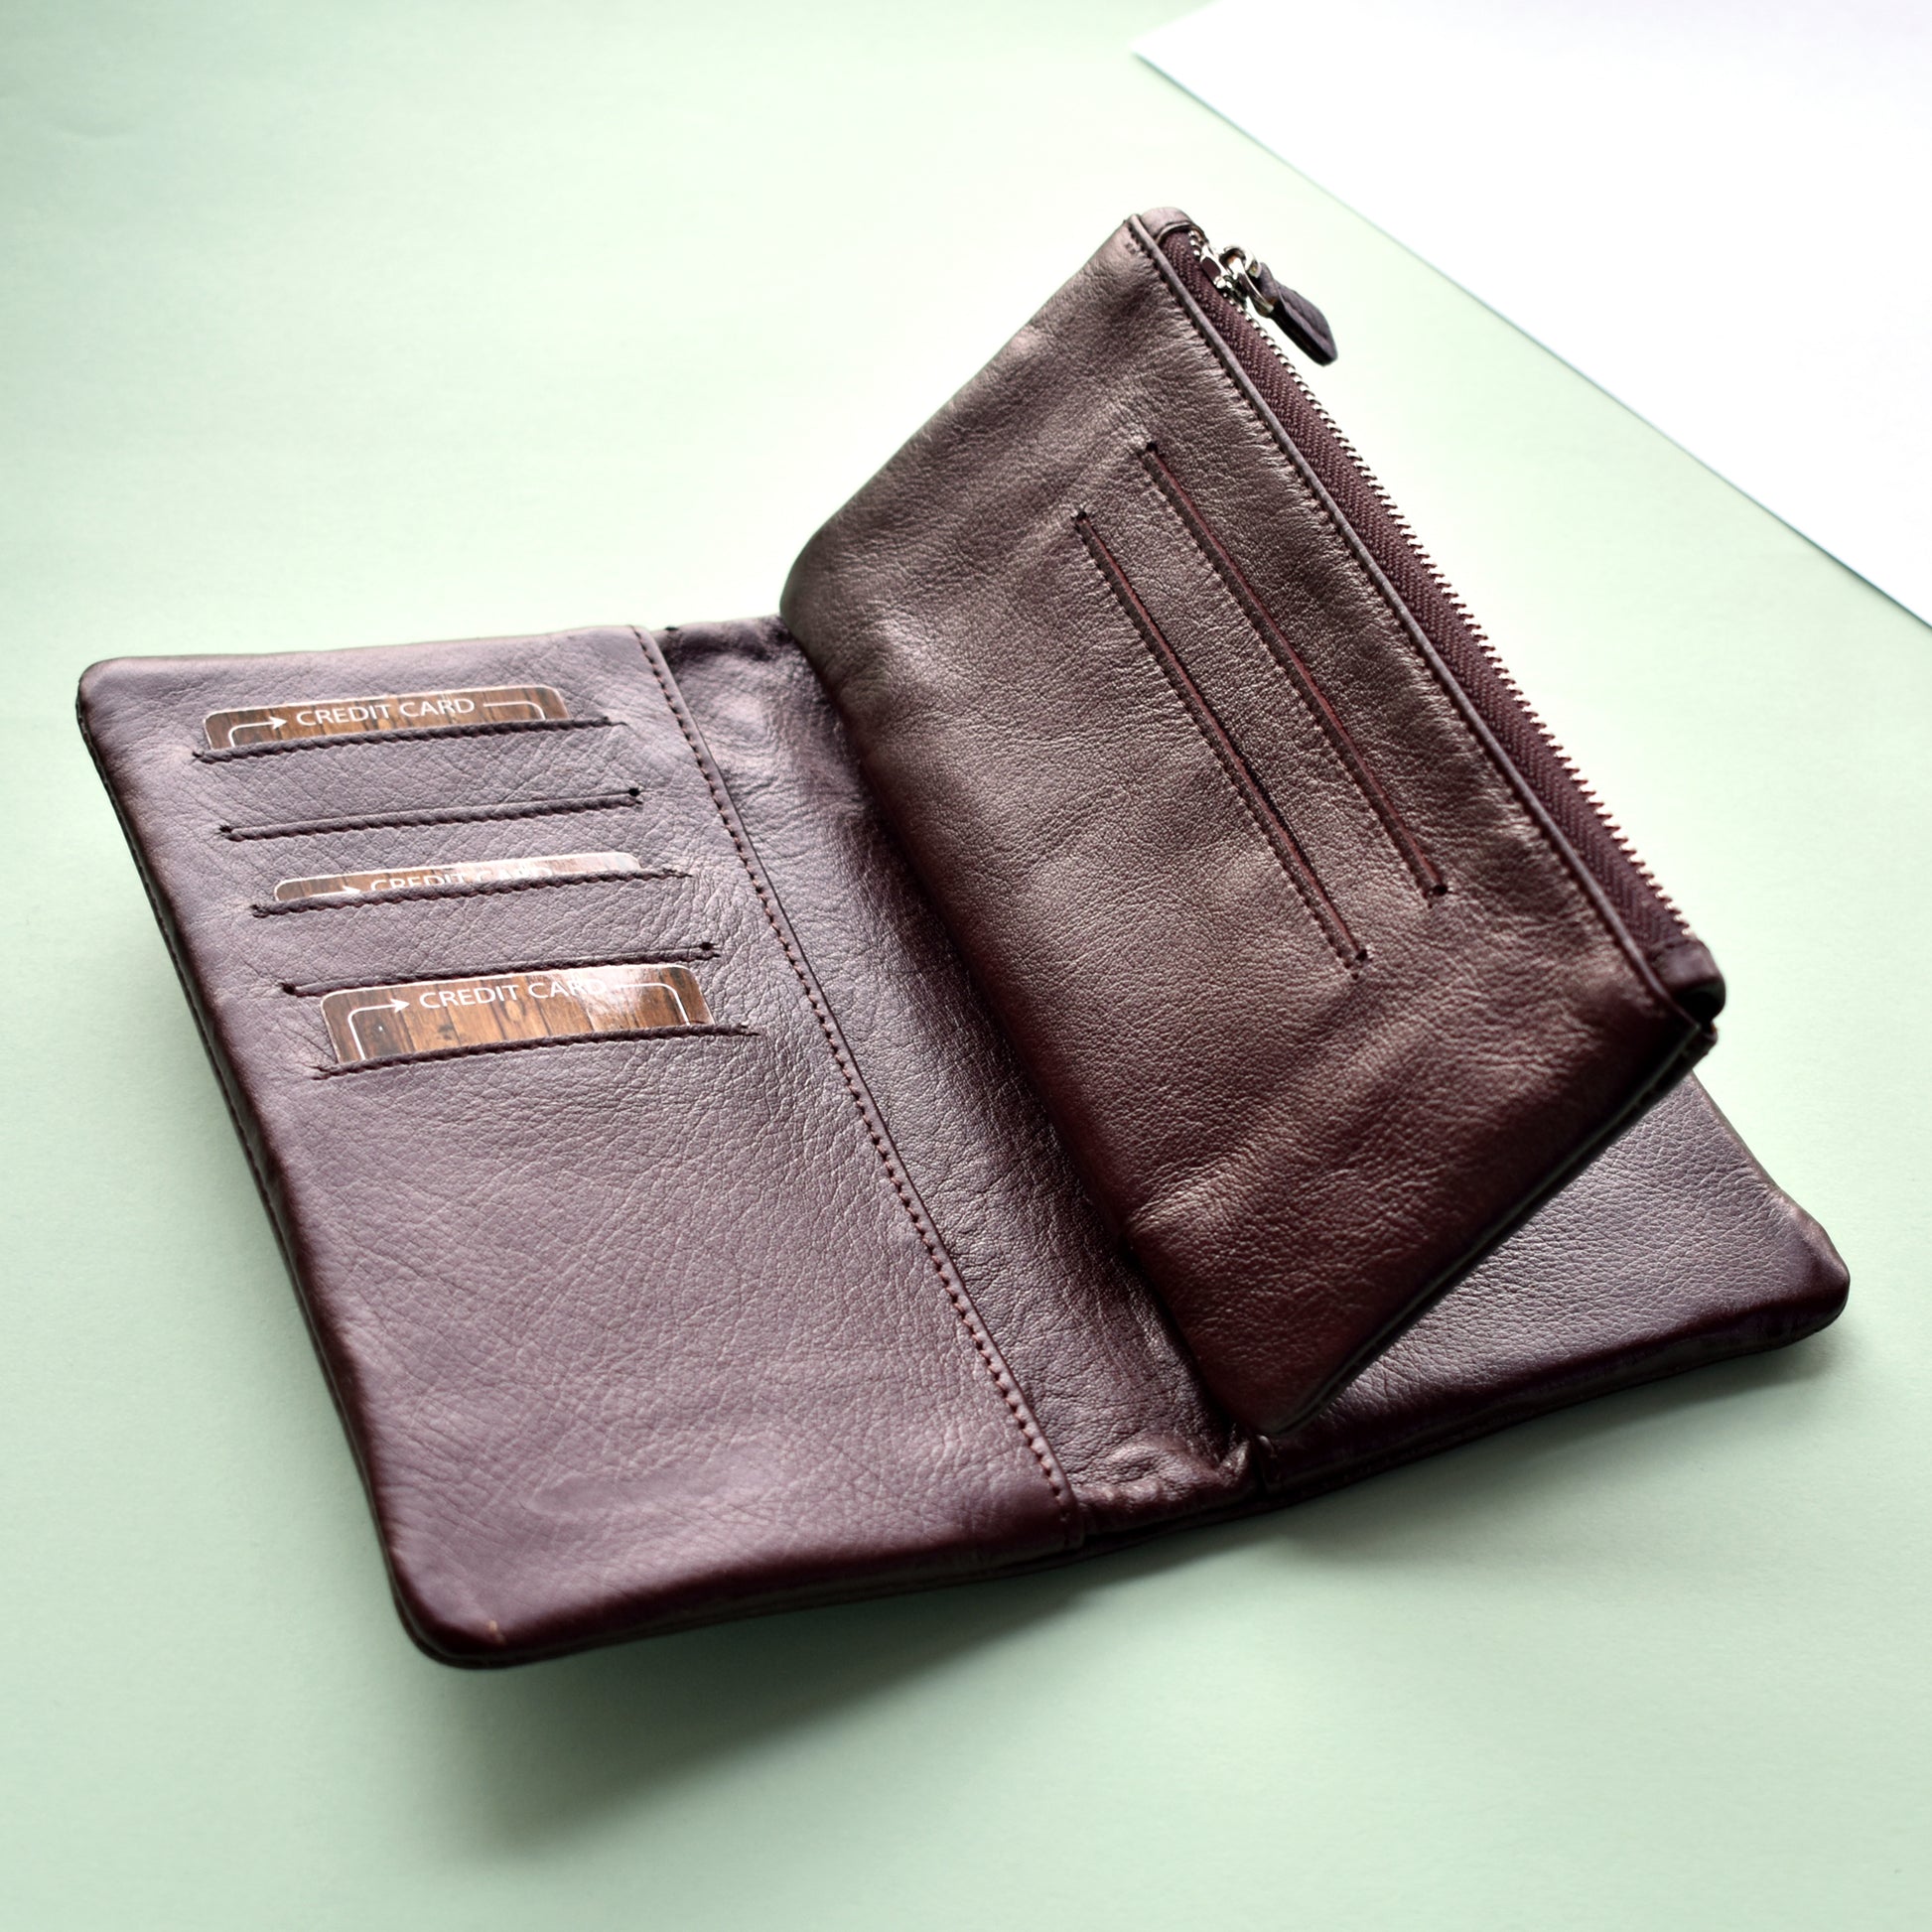 Leather Goods BD - Price: 1200 Taka Premium leather long wallets